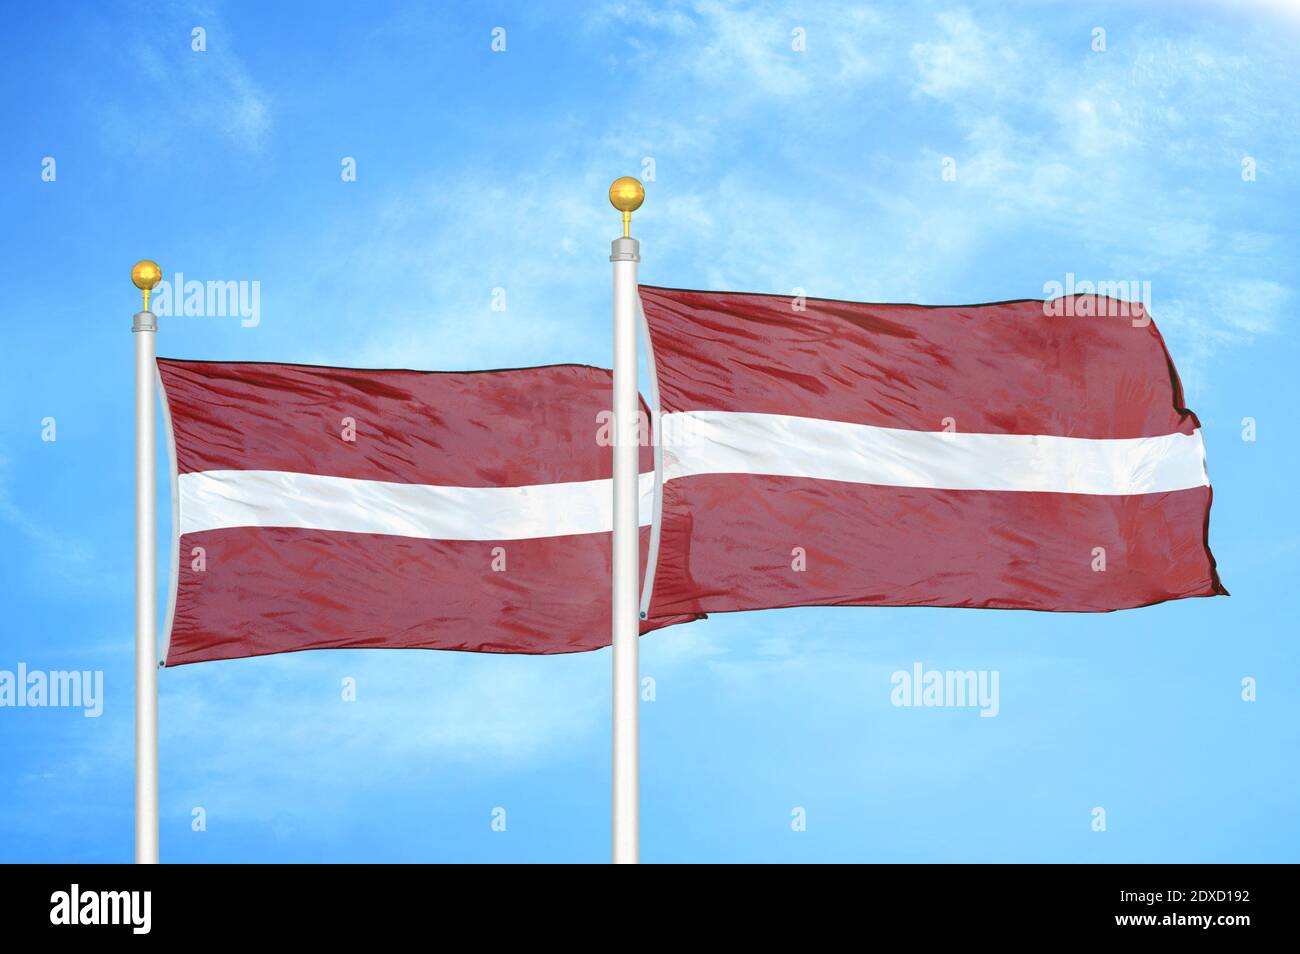 Latvia and Latvia two flags on flagpoles and blue sky Stock Photo